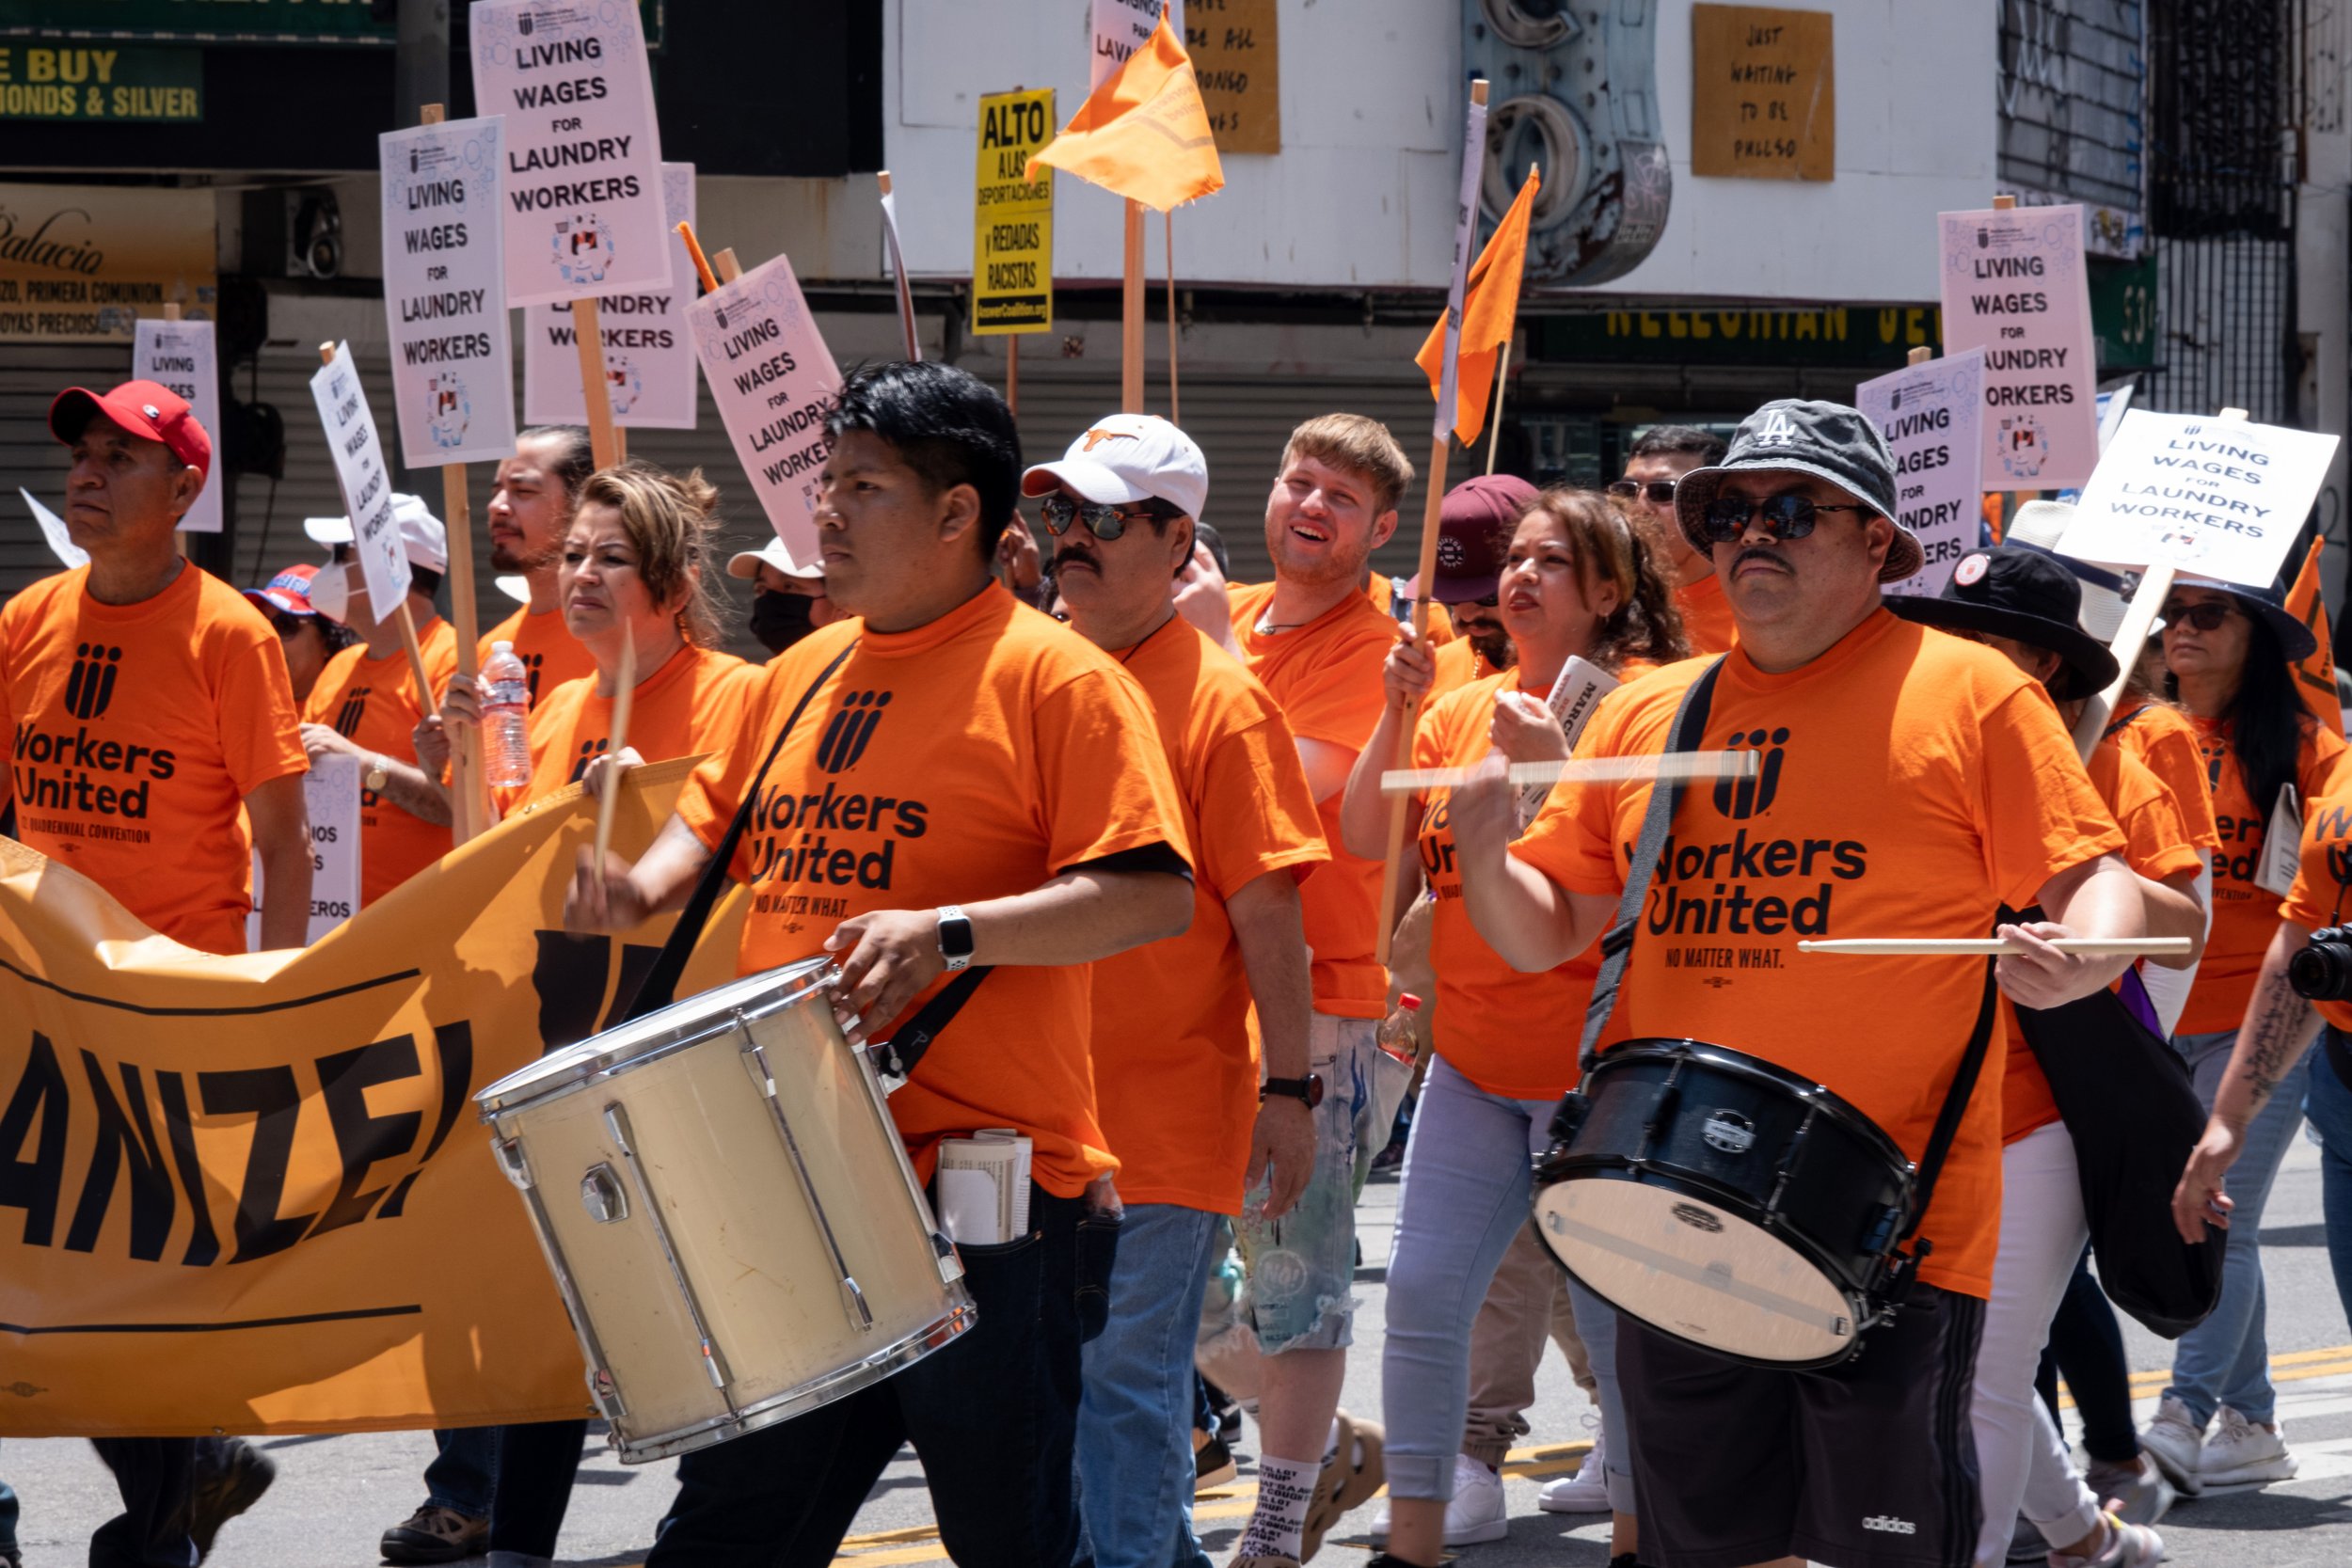  Members of the Workers United labor union pass by, with drummers. Workers United is a labor union that ‘represents about 85,000 workers in the textile, commercial laundry, pharmaceutical, and gaming industries.’ Broadway street in Los Angeles, on Su